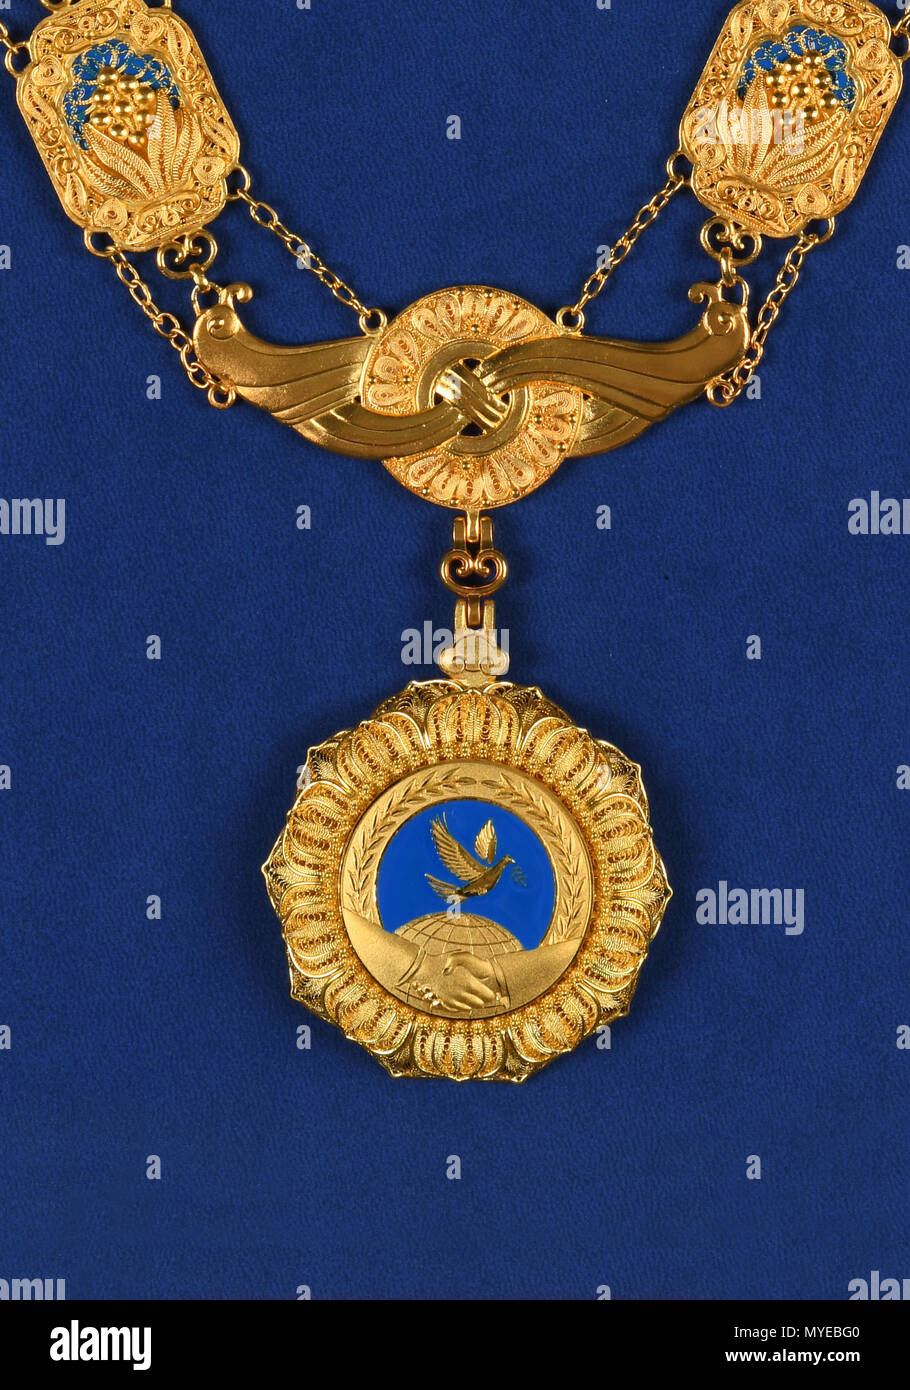 Beijing, China. 7th June, 2018. This photo shows the friendship medal of the People's Republic of China. Credit: Xinhua/Alamy Live News Stock Photo